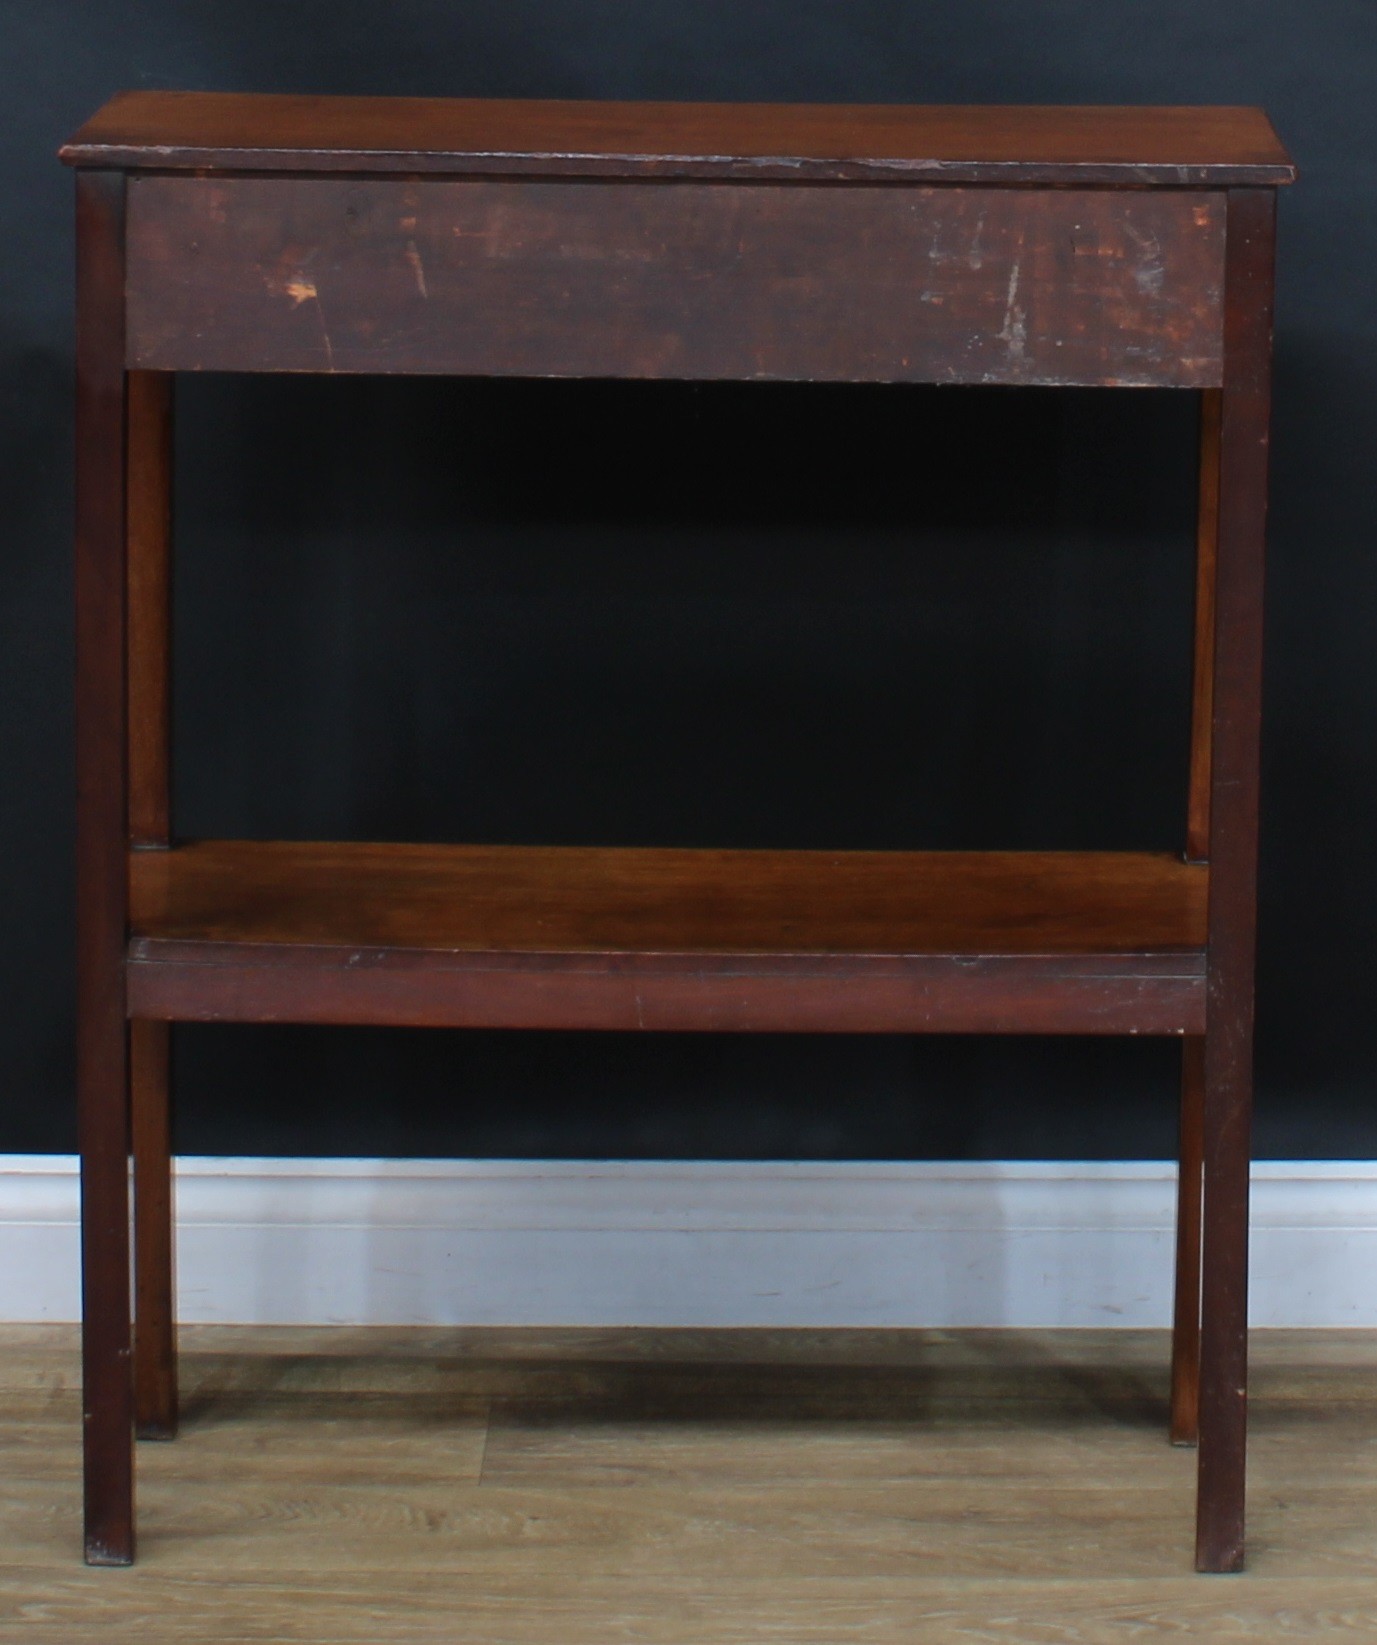 A George III Revival mahogany pier table, rectangular top above a long frieze drawer, square legs, - Image 6 of 6